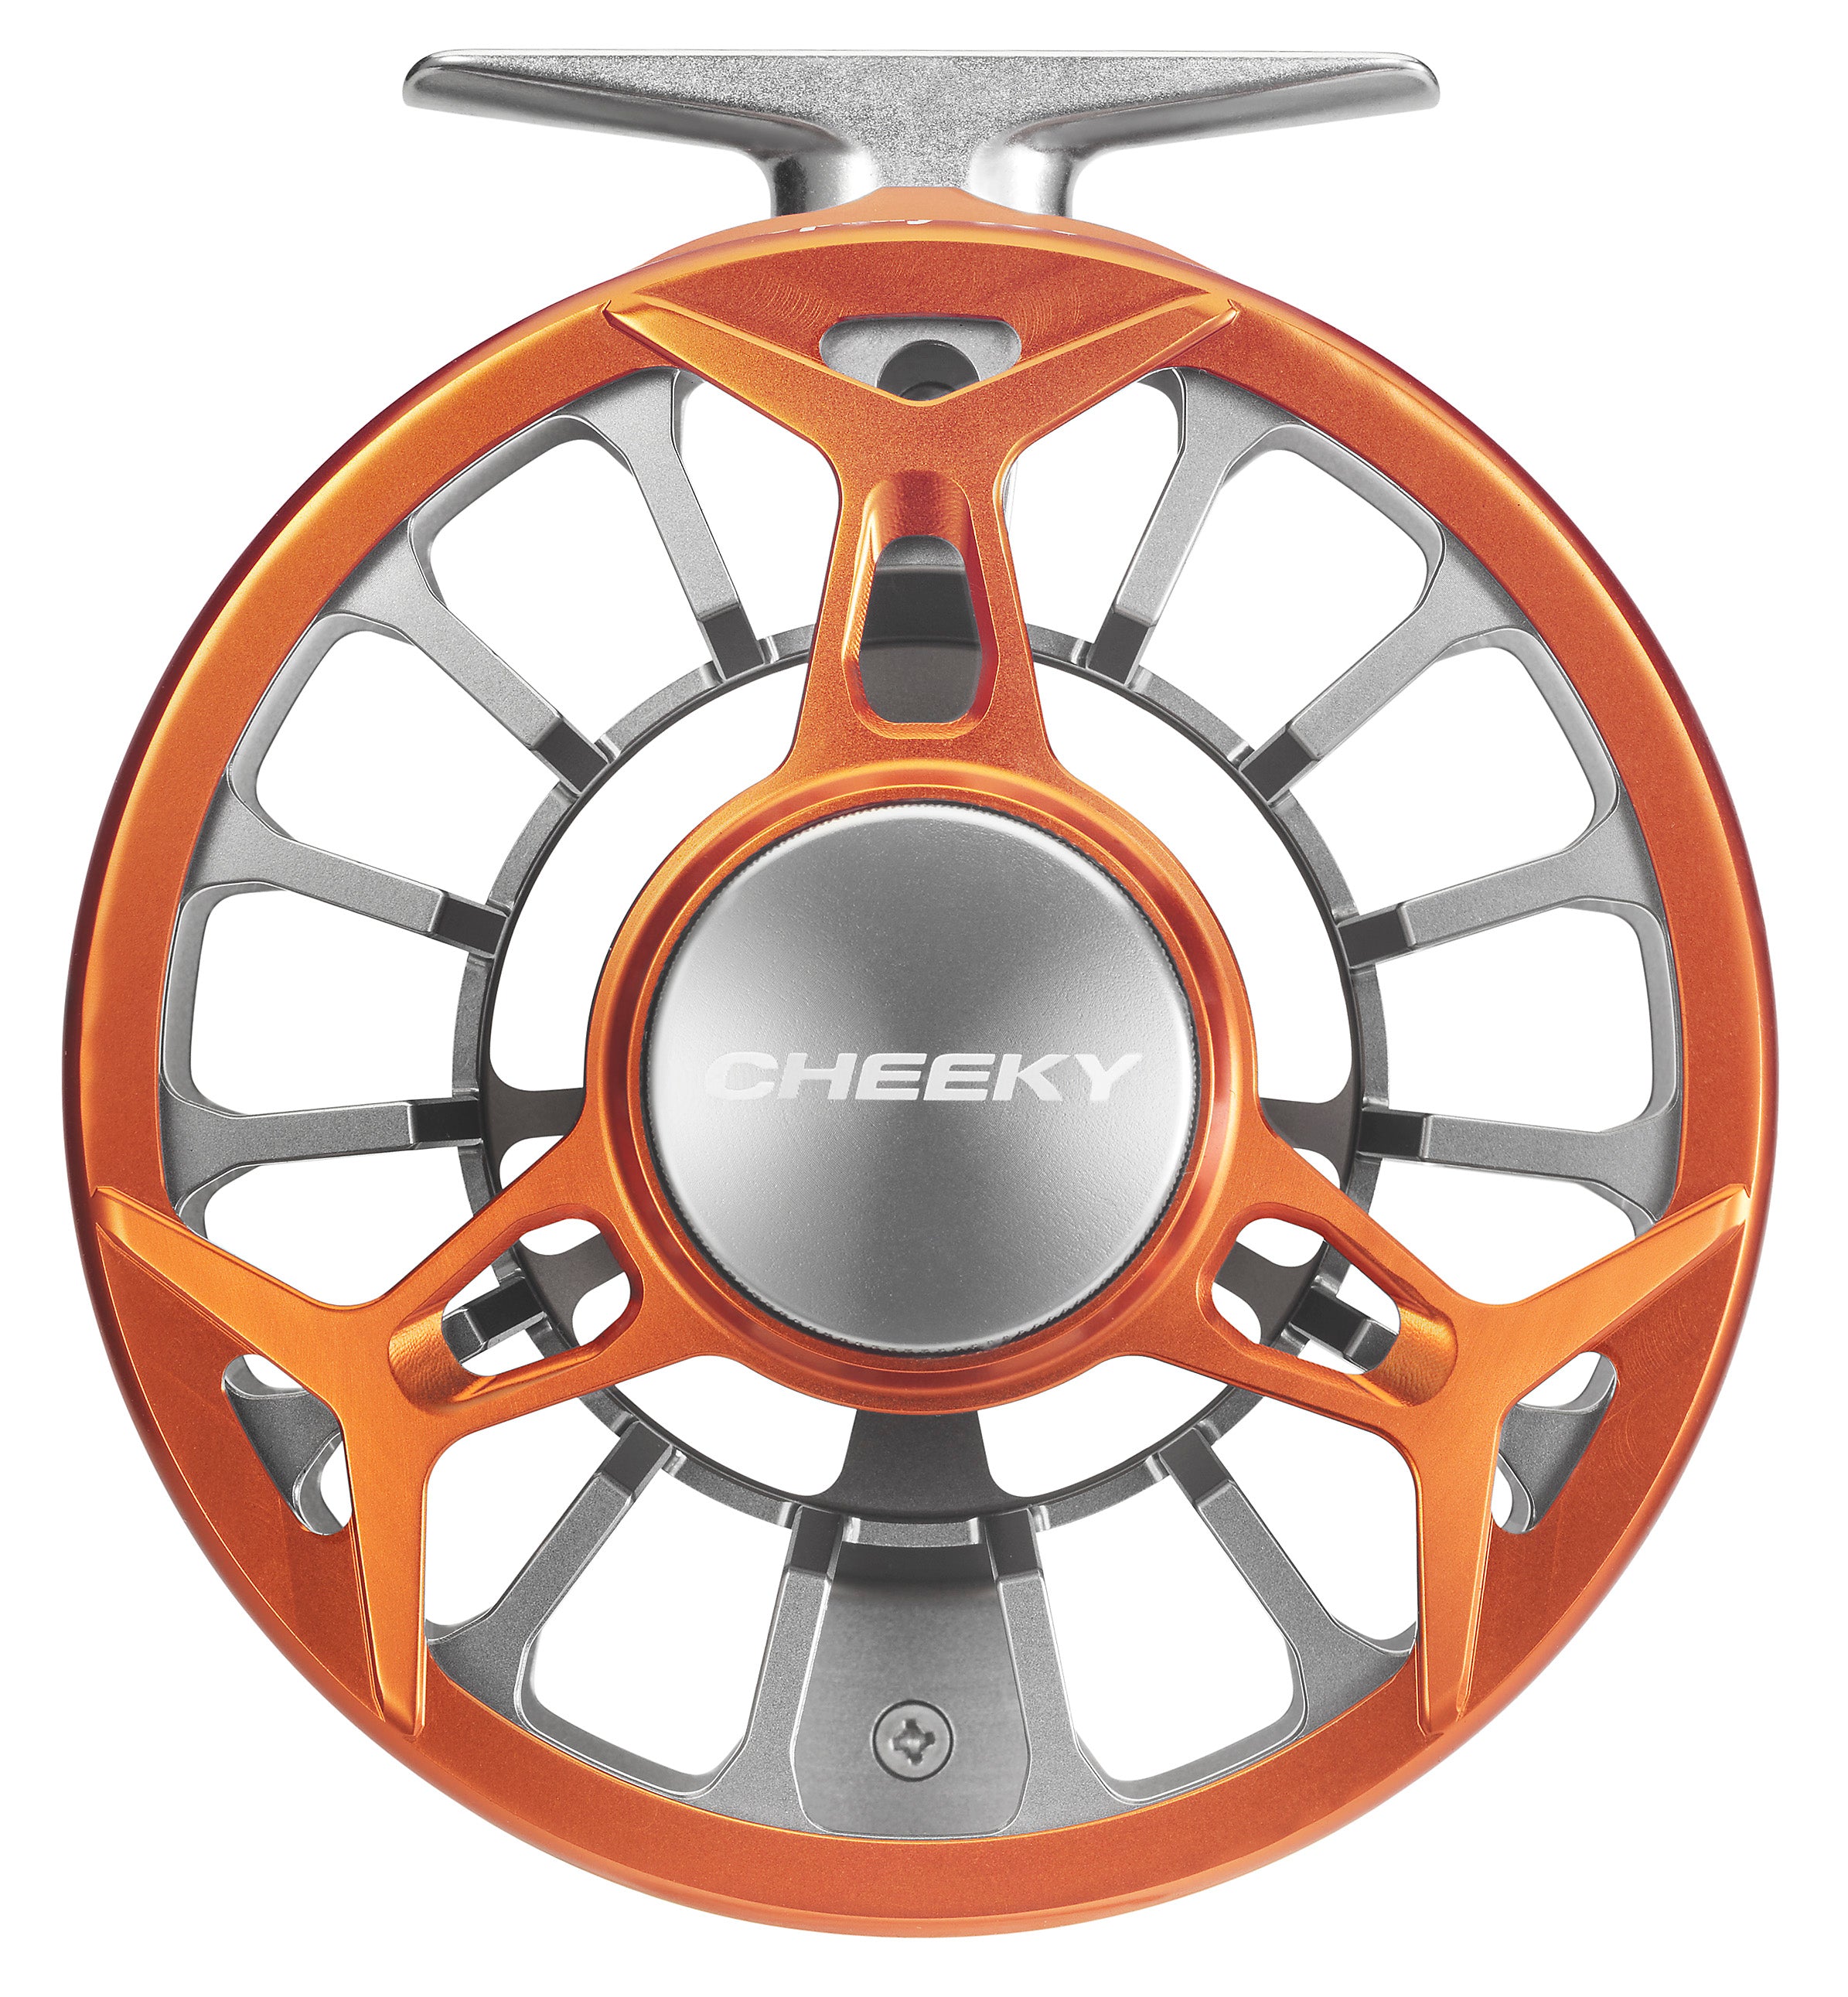 Boost 350 (5-6 wt.) Triple Play) - Cheeky Fishing Boost Fly Reels :  : Deportes y Aire Libre